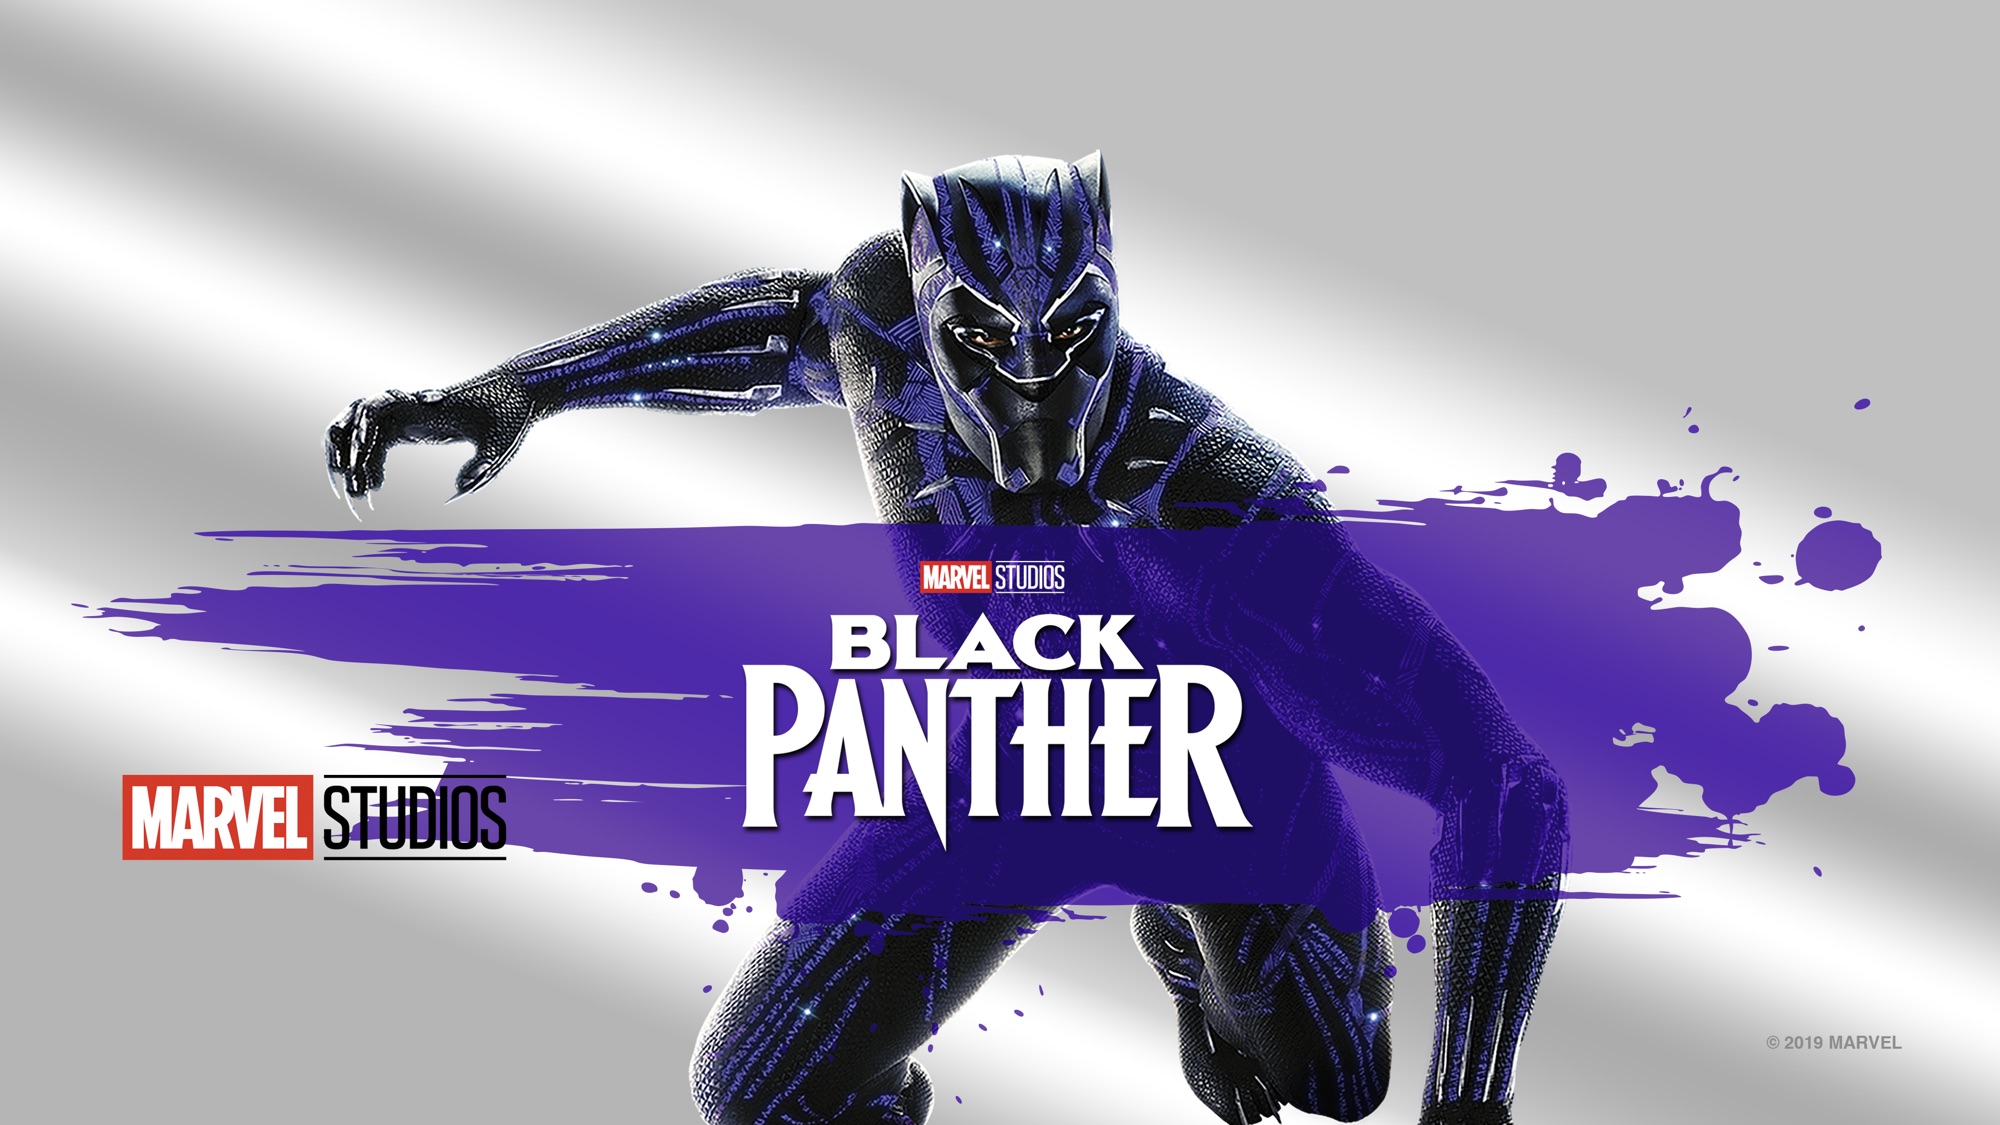 Black Panther download the last version for ios